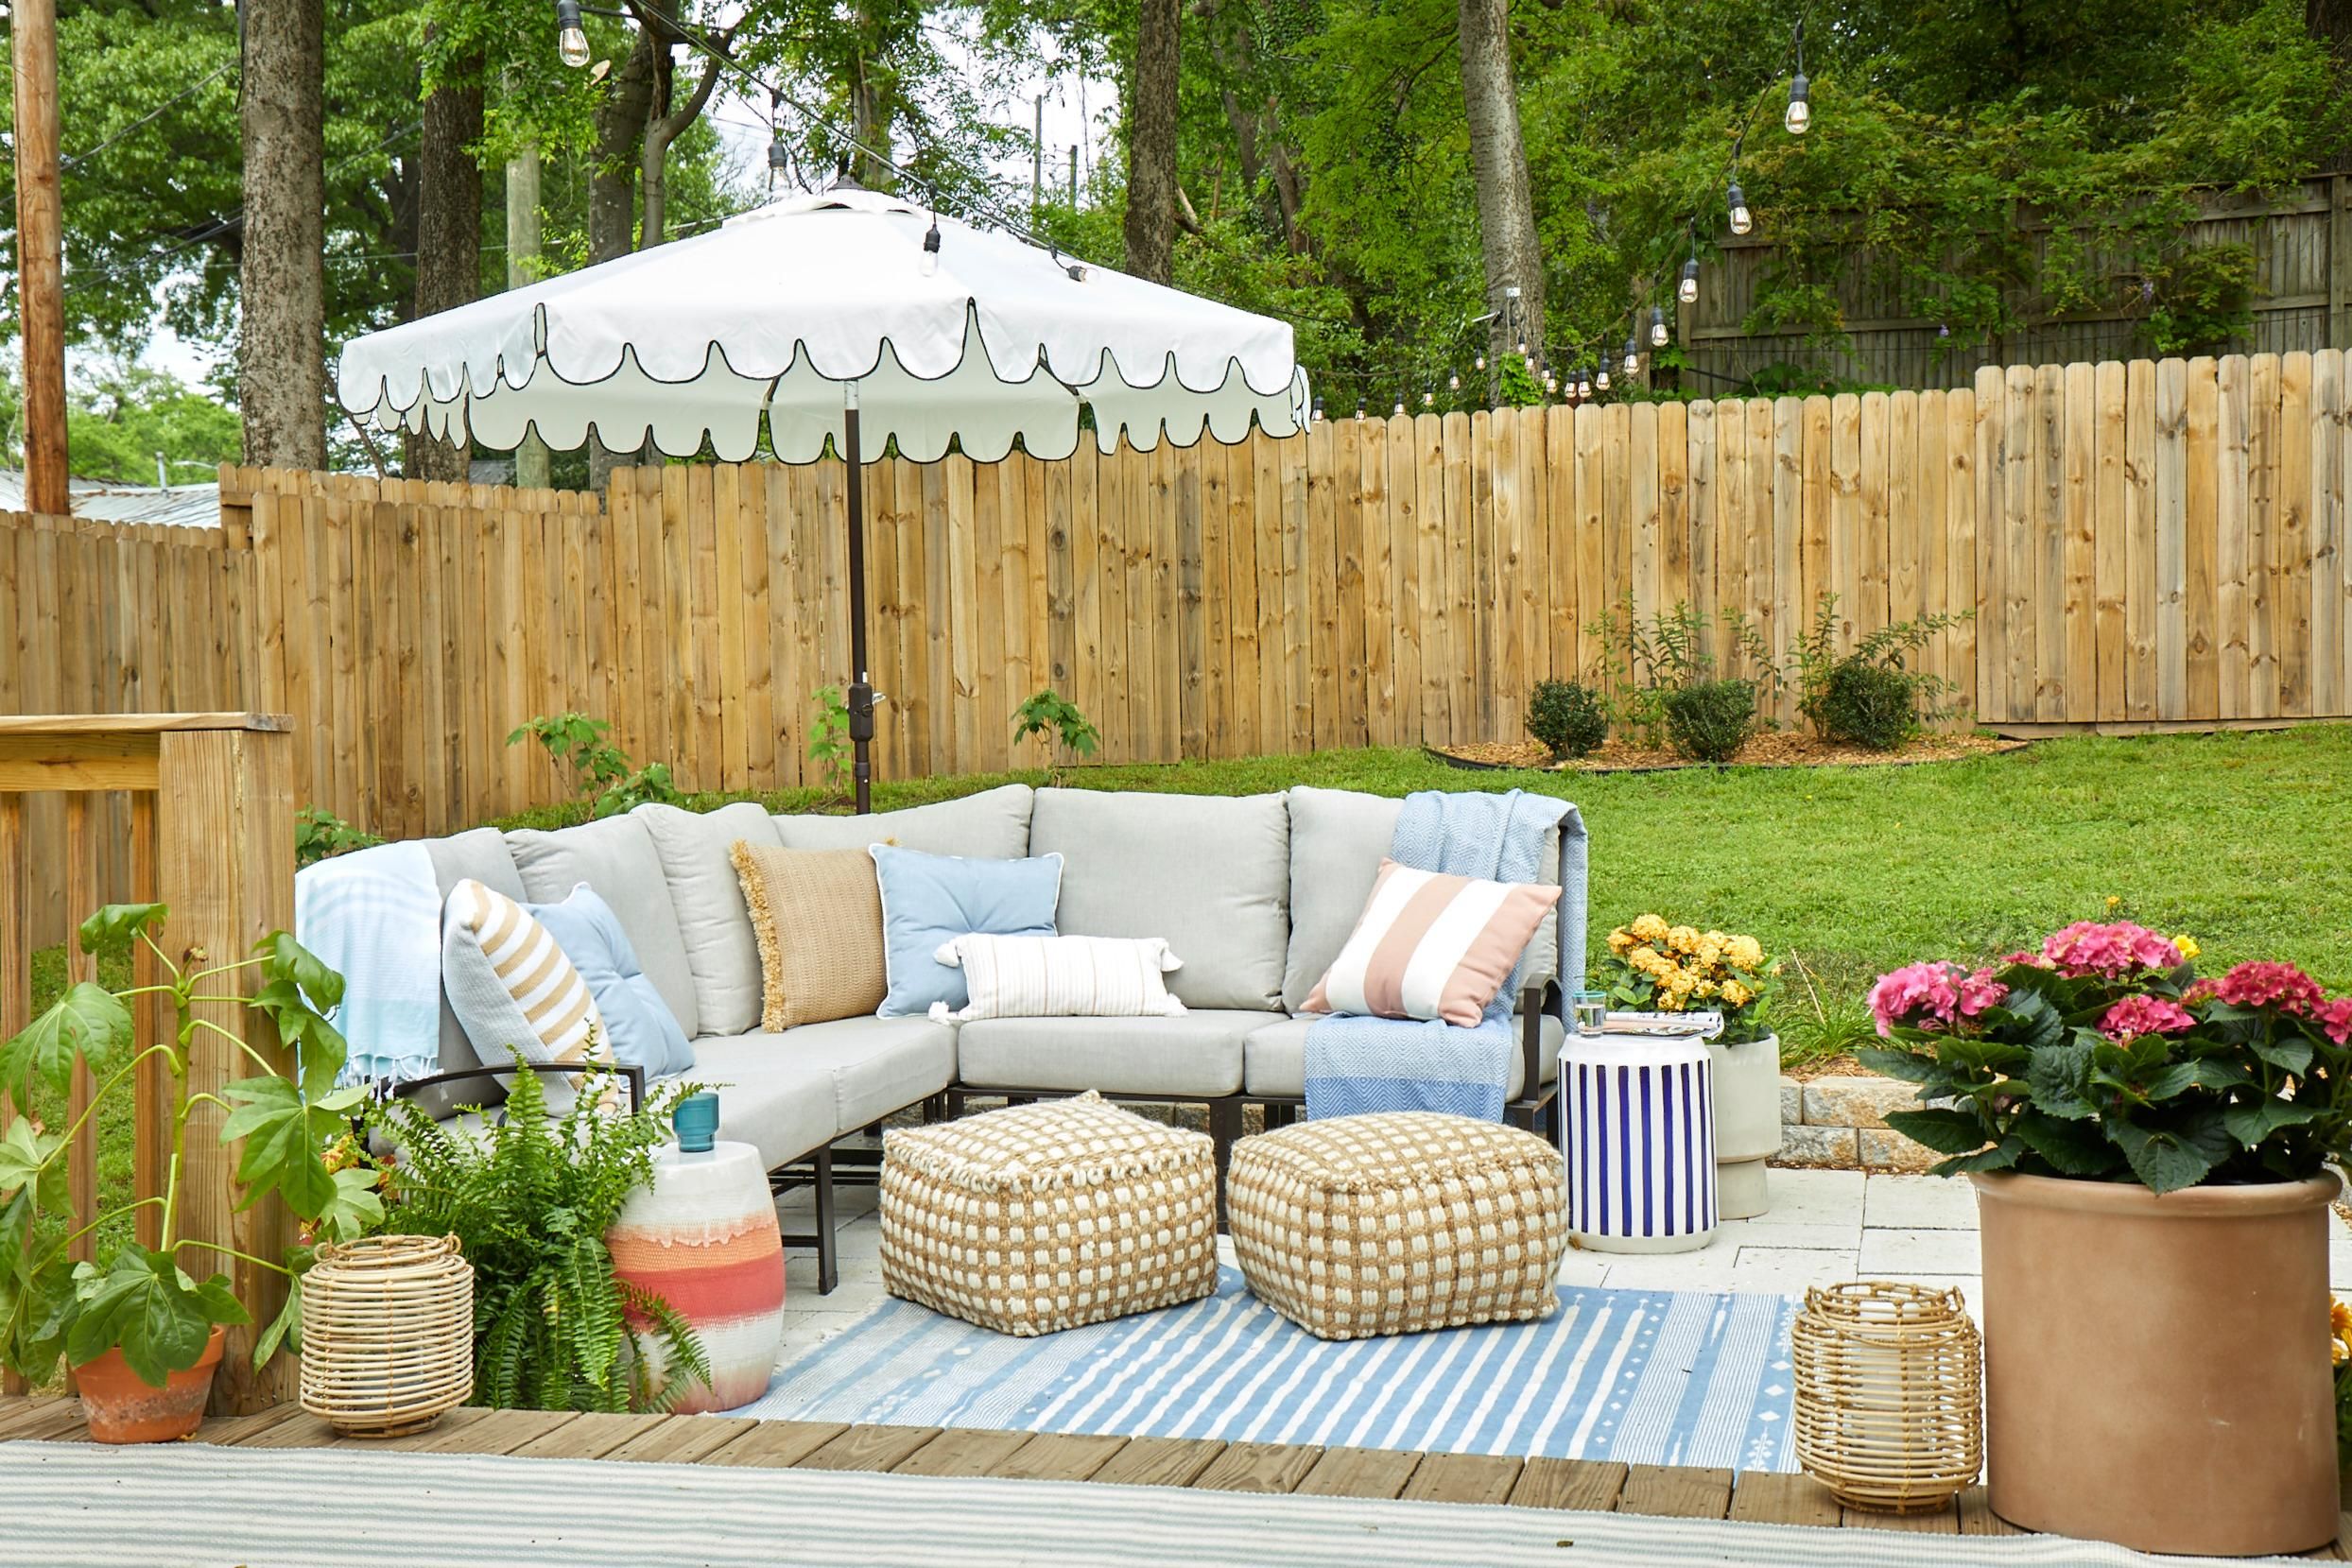 6 Ways To Spruce Up Your Patio Décor